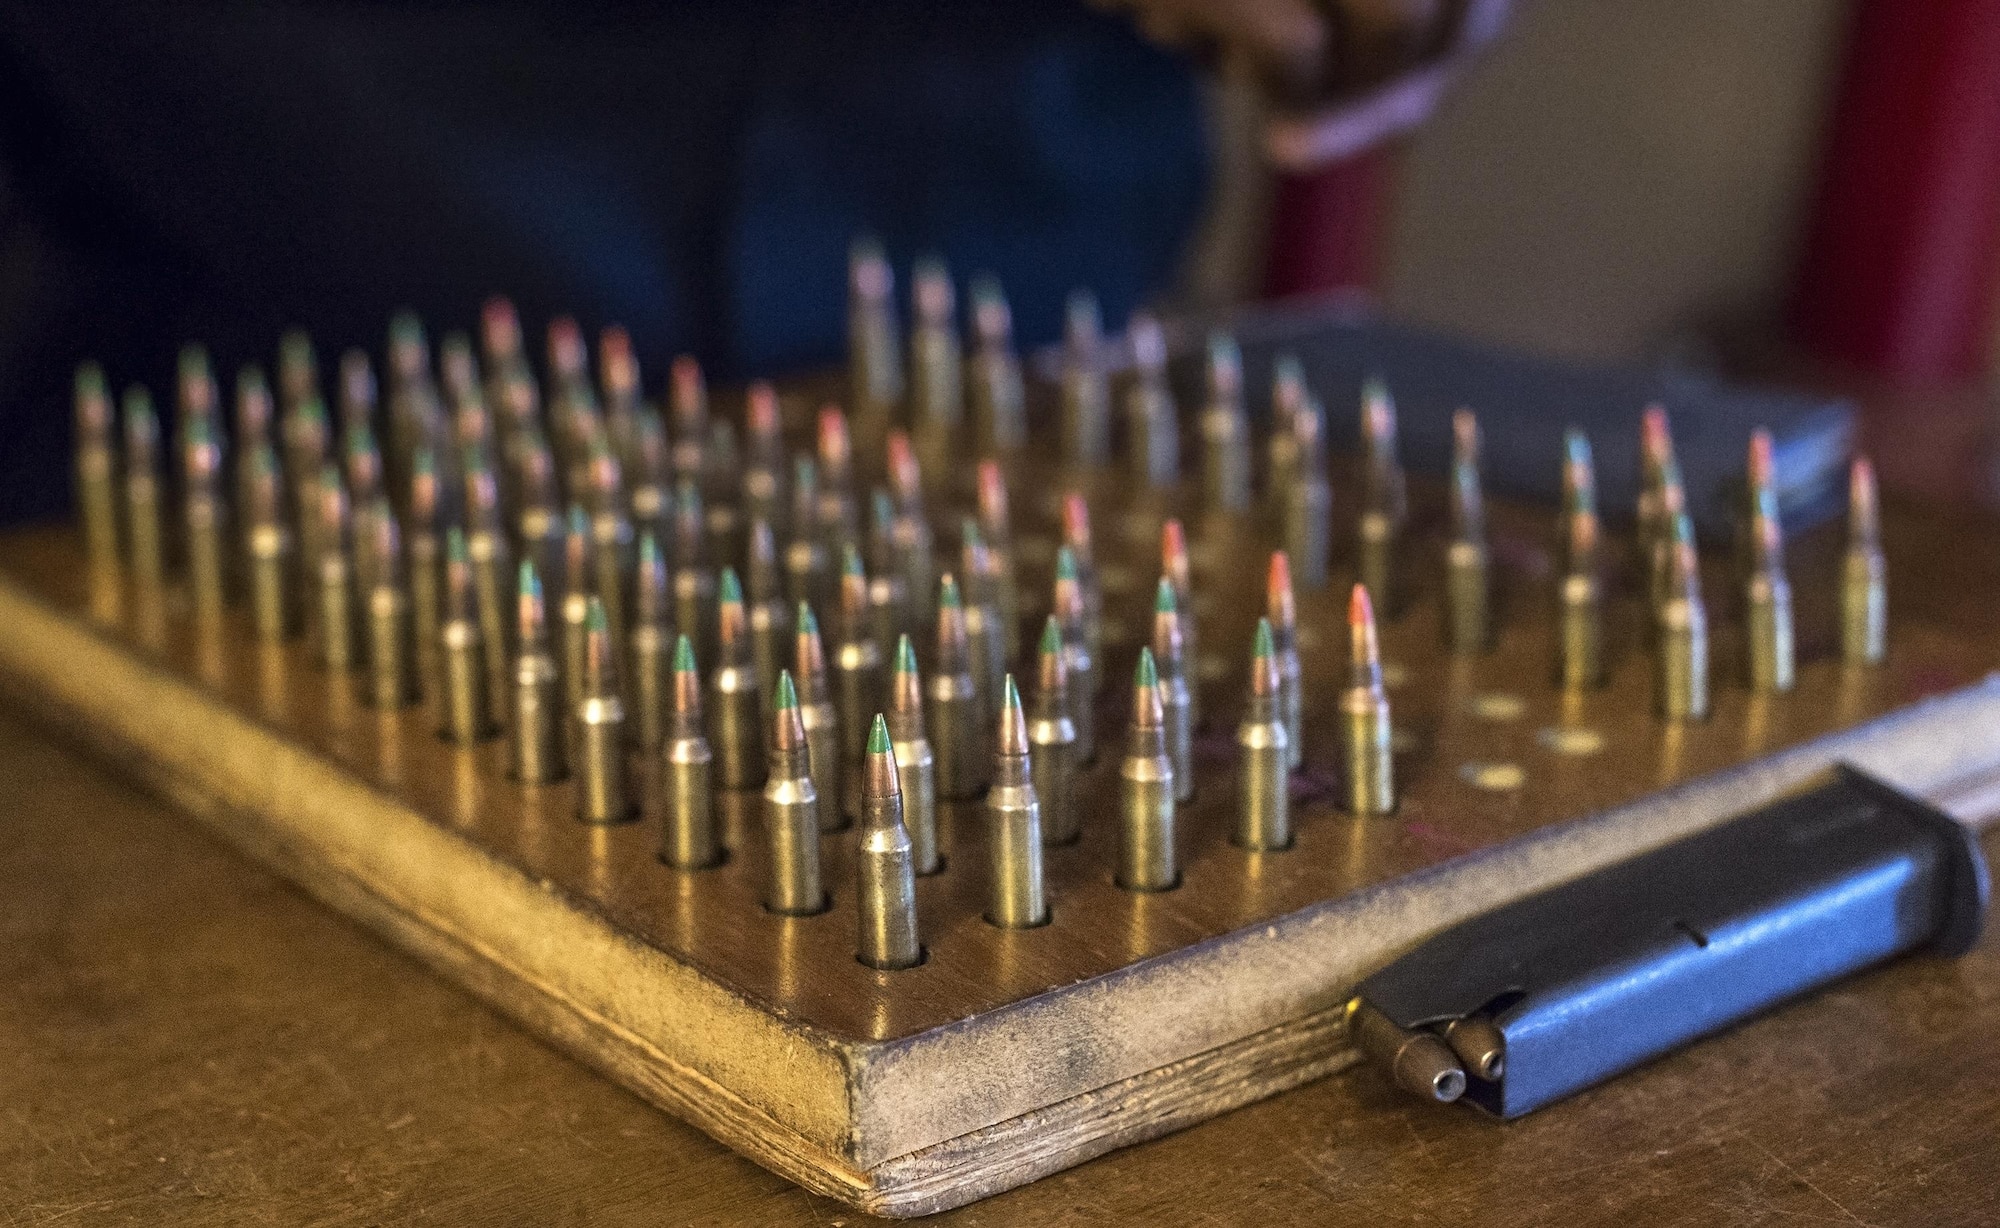 Ammunition rests in a slotted piece of wood, Aug. 9, 2016, at Moody Air Force Base, Ga. The green tip on the round indicates a regular round, while the orange tip indicates a tracer round. When security forces personnel load their magazines they start with four green tipped rounds and then a tracer round. Tracer rounds have a pyrotechnic charge in their base that emit a bright light so personnel can see where they’re firing. (U.S. Air Force photo by Airman 1st Class Robinson)